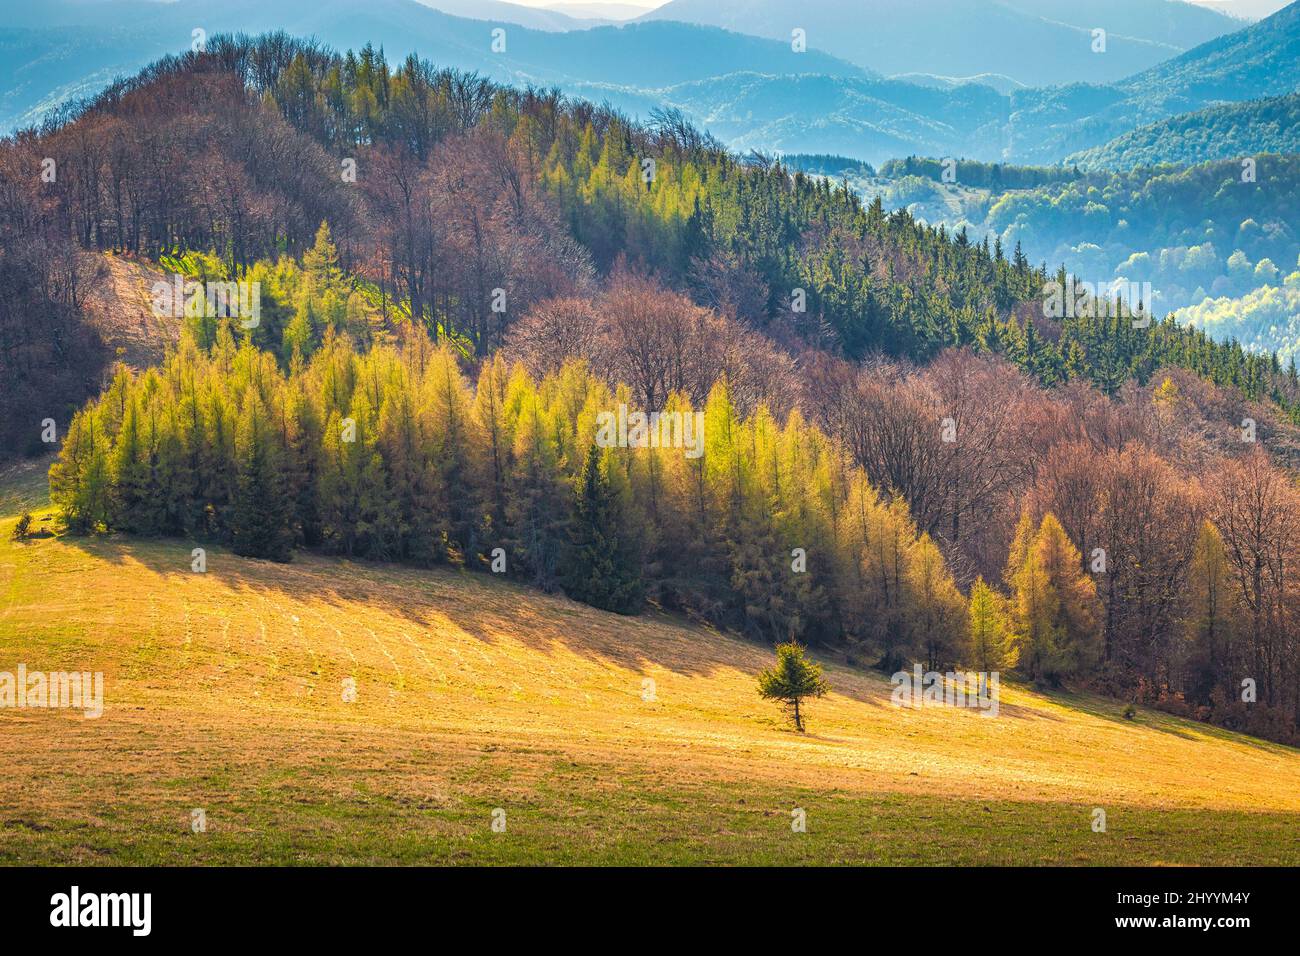 Landscape with hills covered with forests. The Strazov mountains  in Slovakia, Europe. Stock Photo